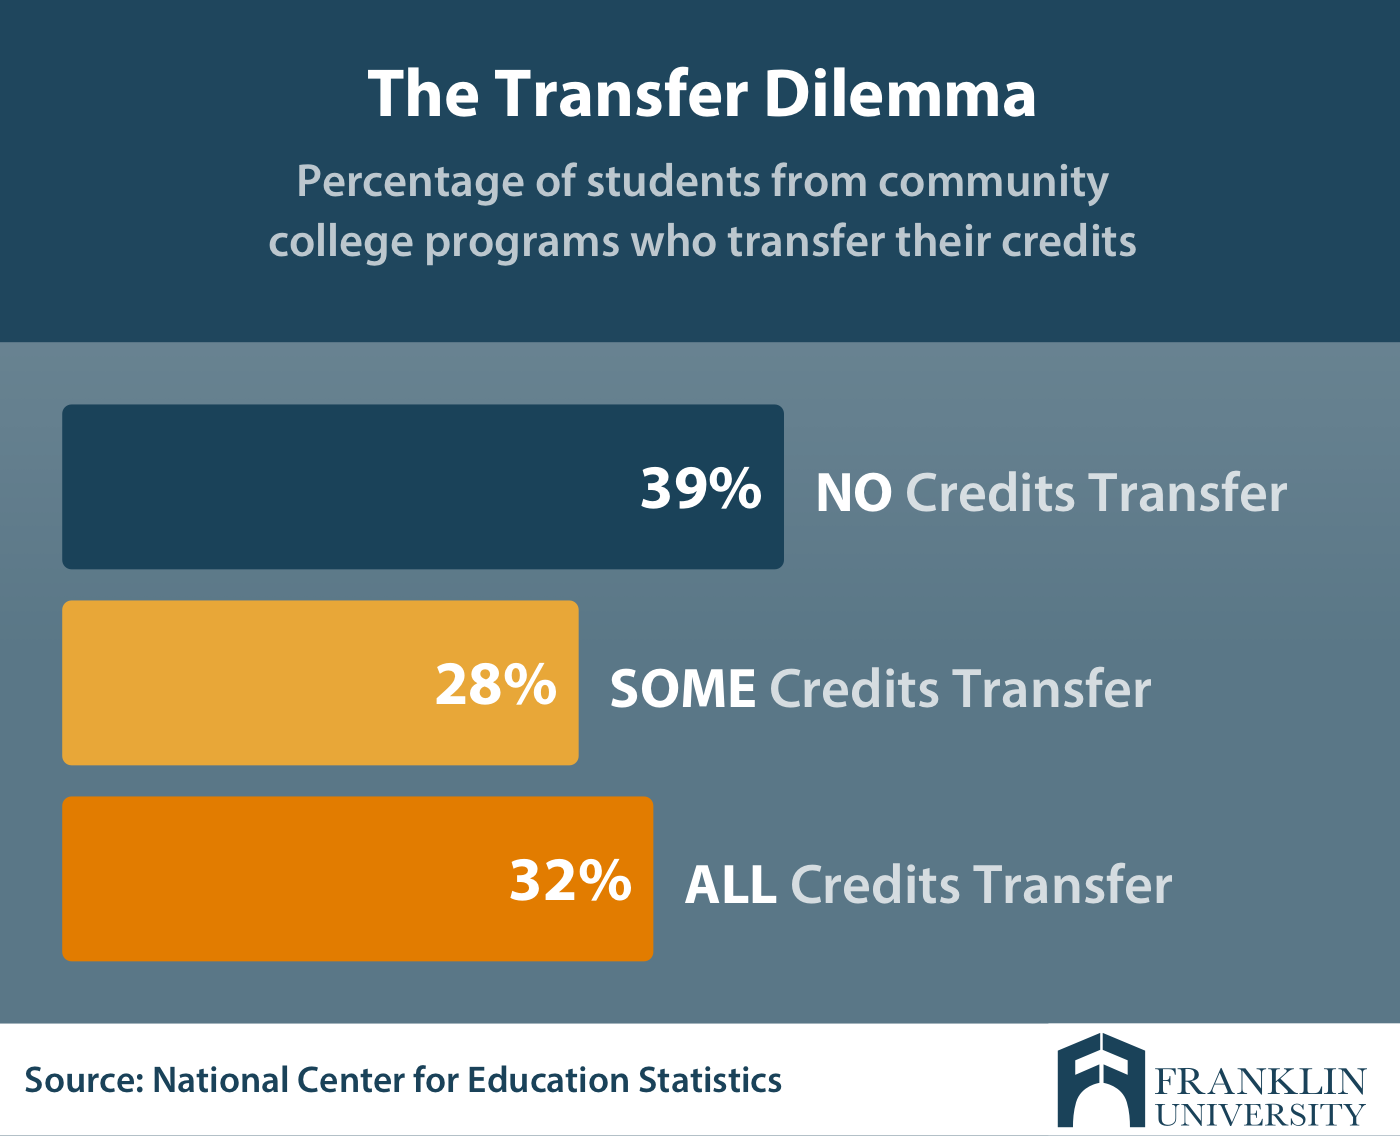 graphic describes the transfer dilemma, a certain percentage of students from community colleges who are able to transfer their credits